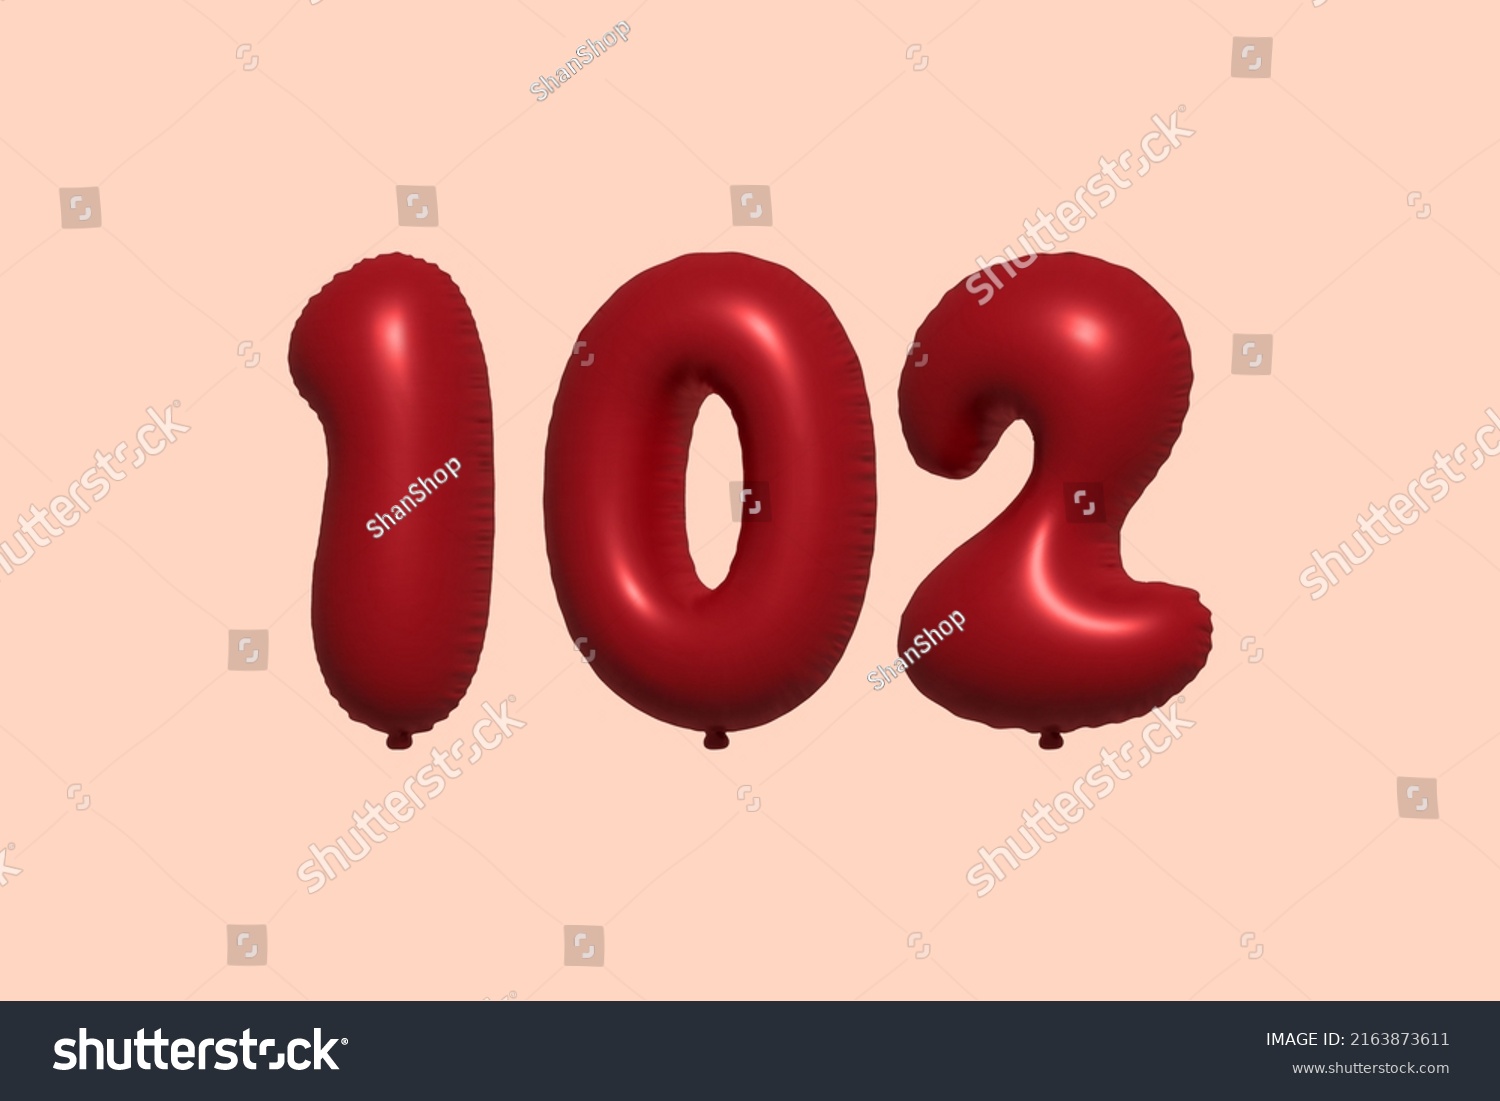 SVG of 102 3d number balloon made of realistic metallic air balloon 3d rendering. 3D Red helium balloons for sale decoration Party Birthday, Celebrate anniversary, Wedding Holiday. Vector illustration svg